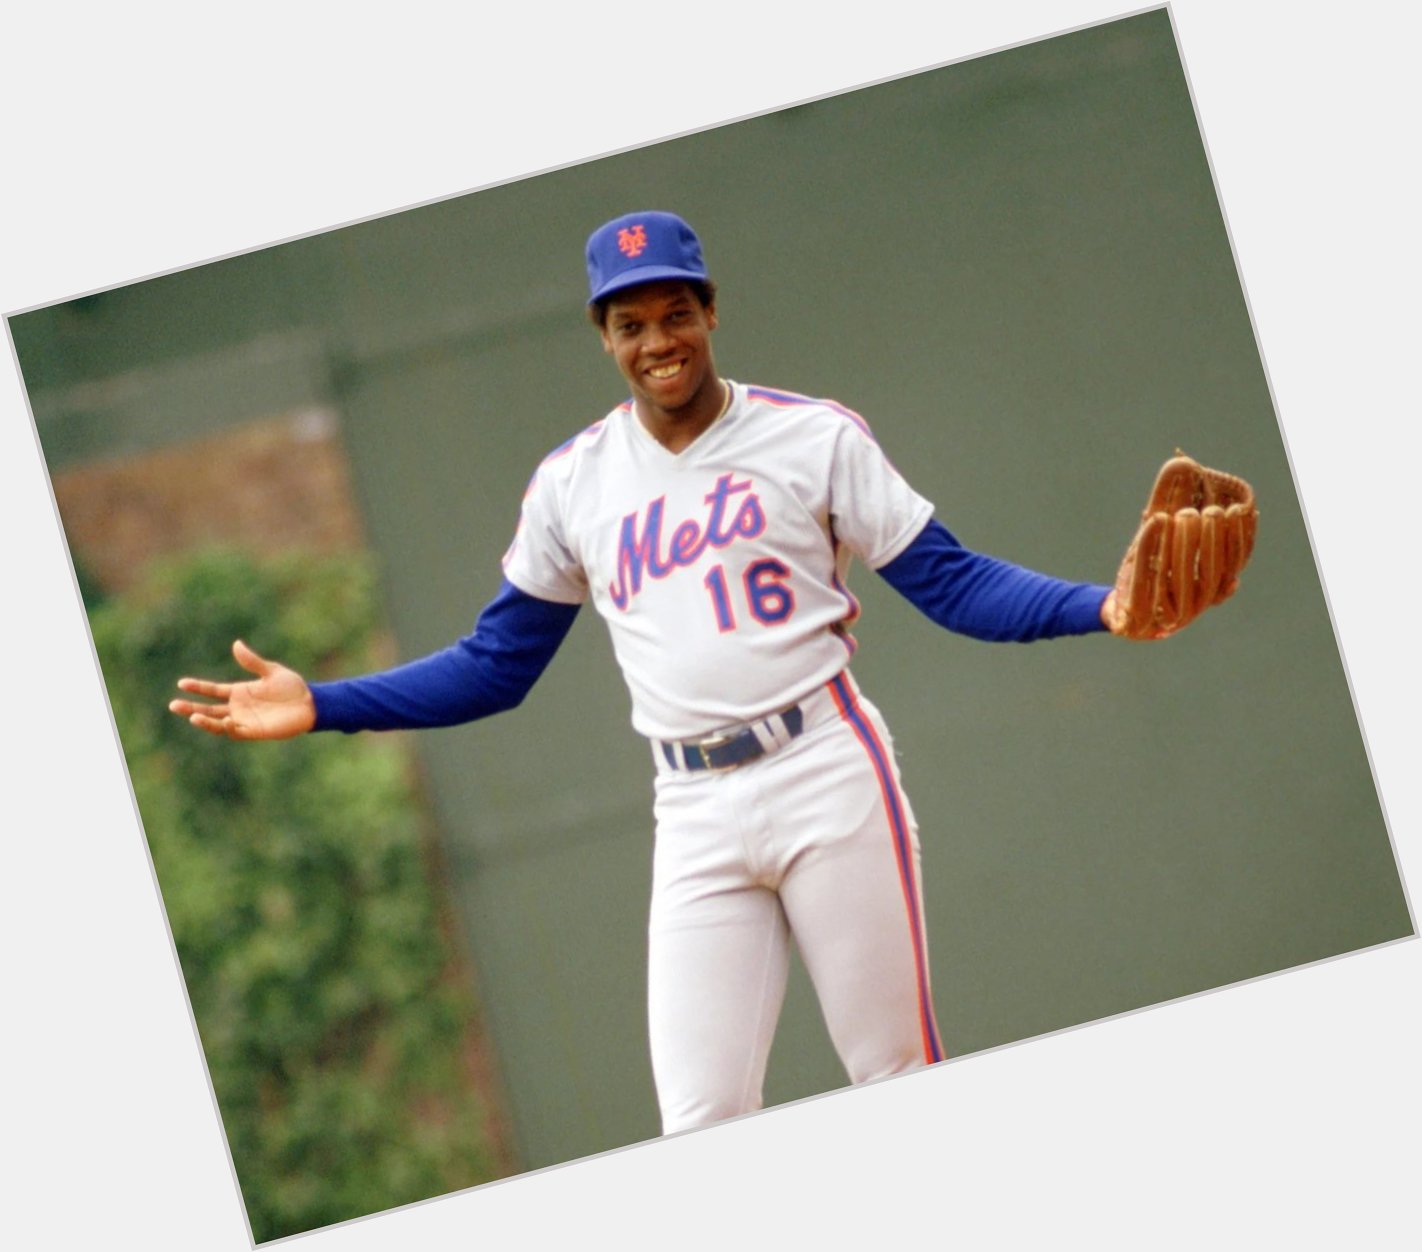 Happy 57th birthday to Dwight Gooden. He was the best pitcher in baseball when he was just 20 years old. 